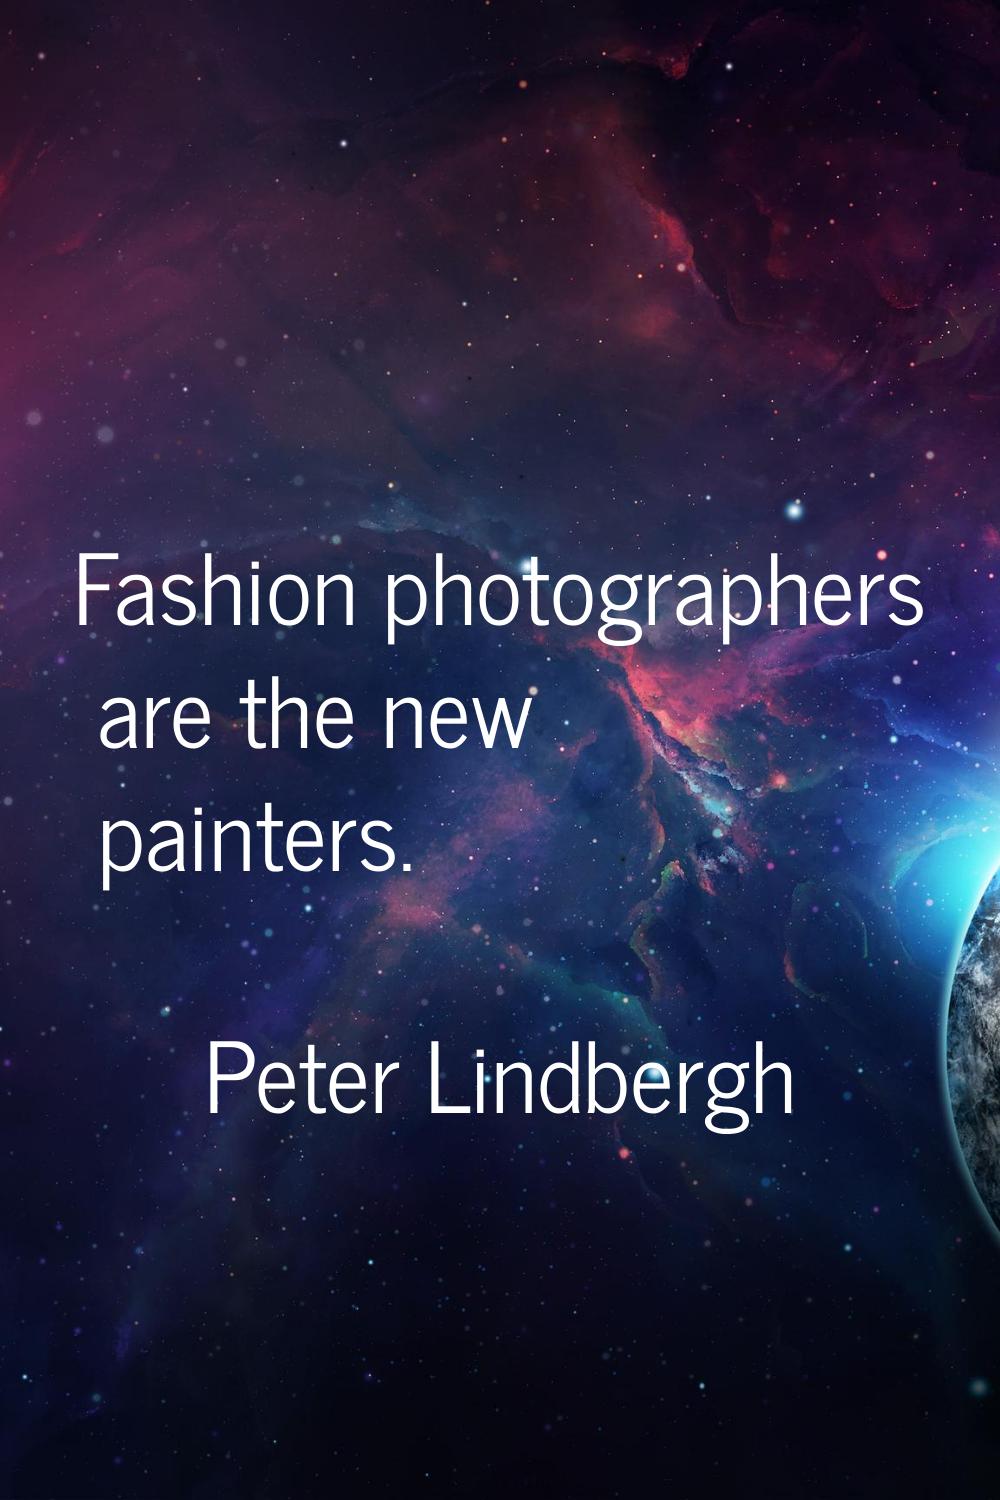 Fashion photographers are the new painters.